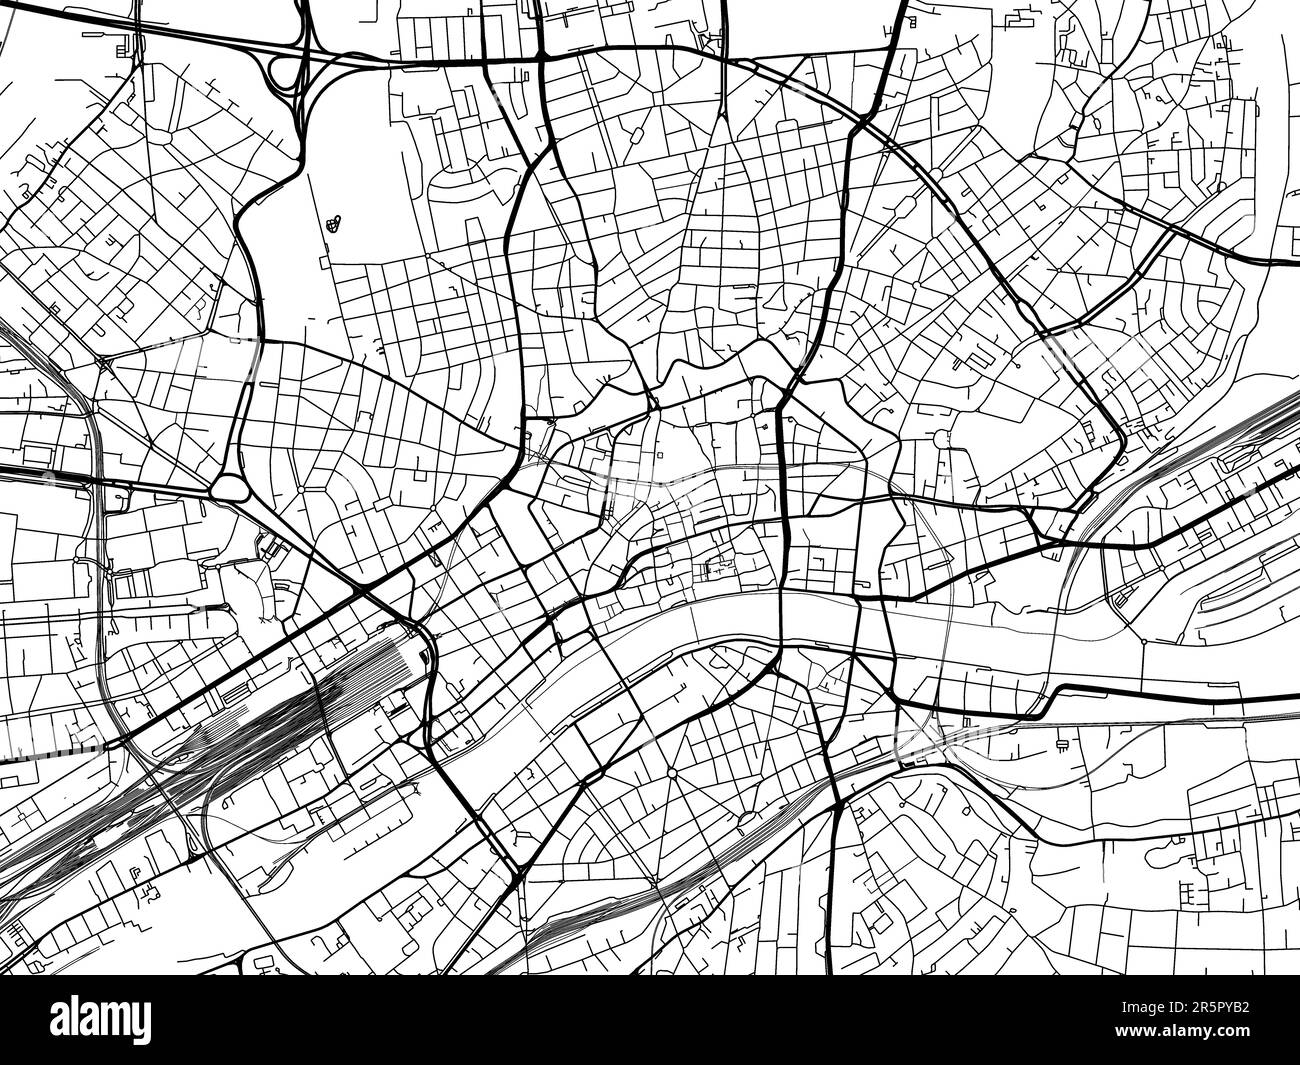 Vector road map of the city of  Frankfurt am Main in Germany on a white background. Stock Photo